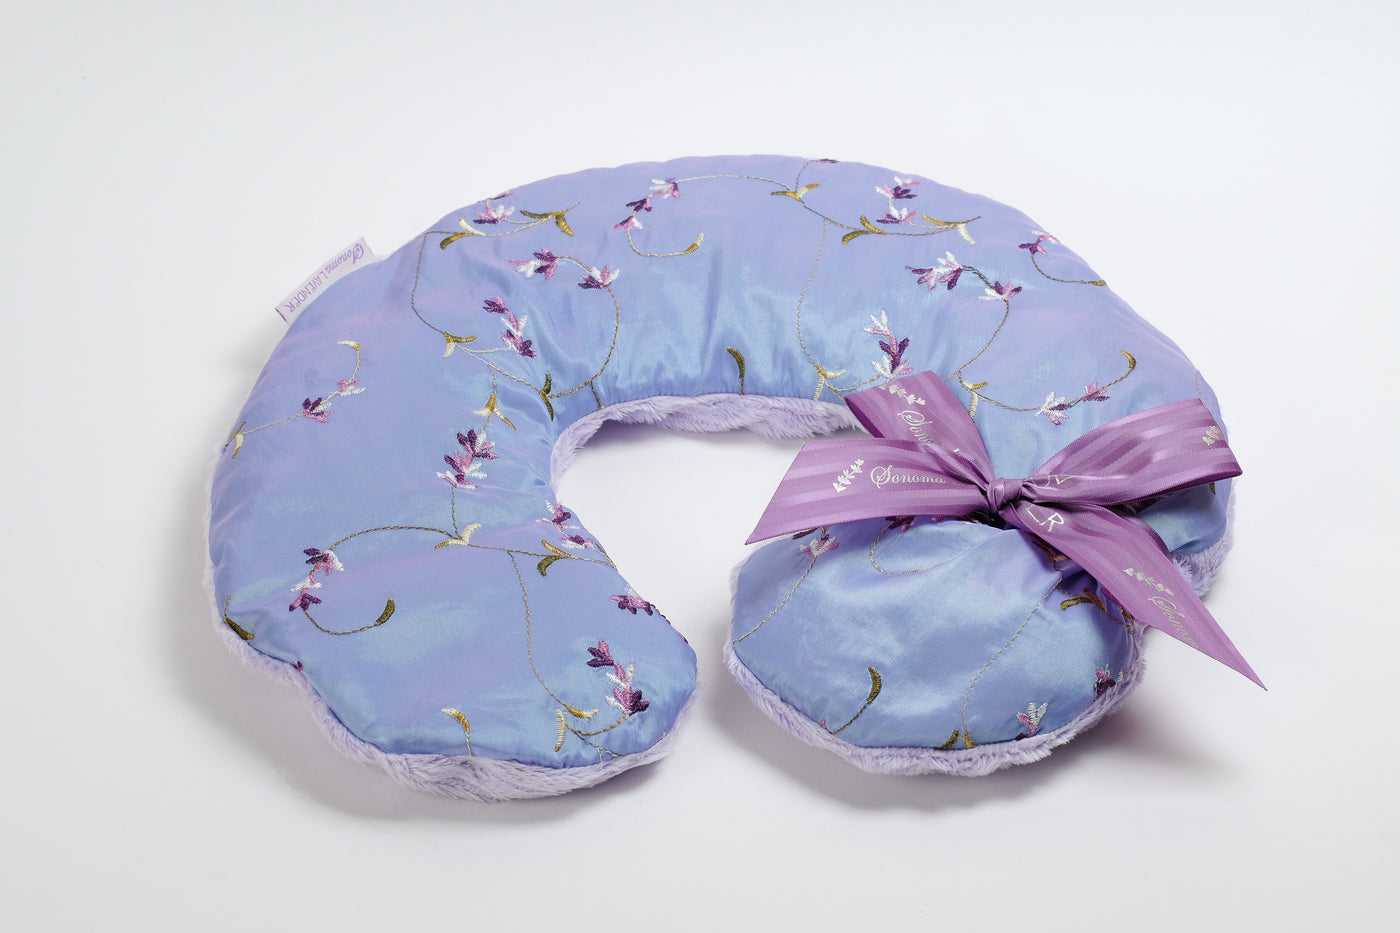 Lavender Neck Pillow - SOLD OUT!